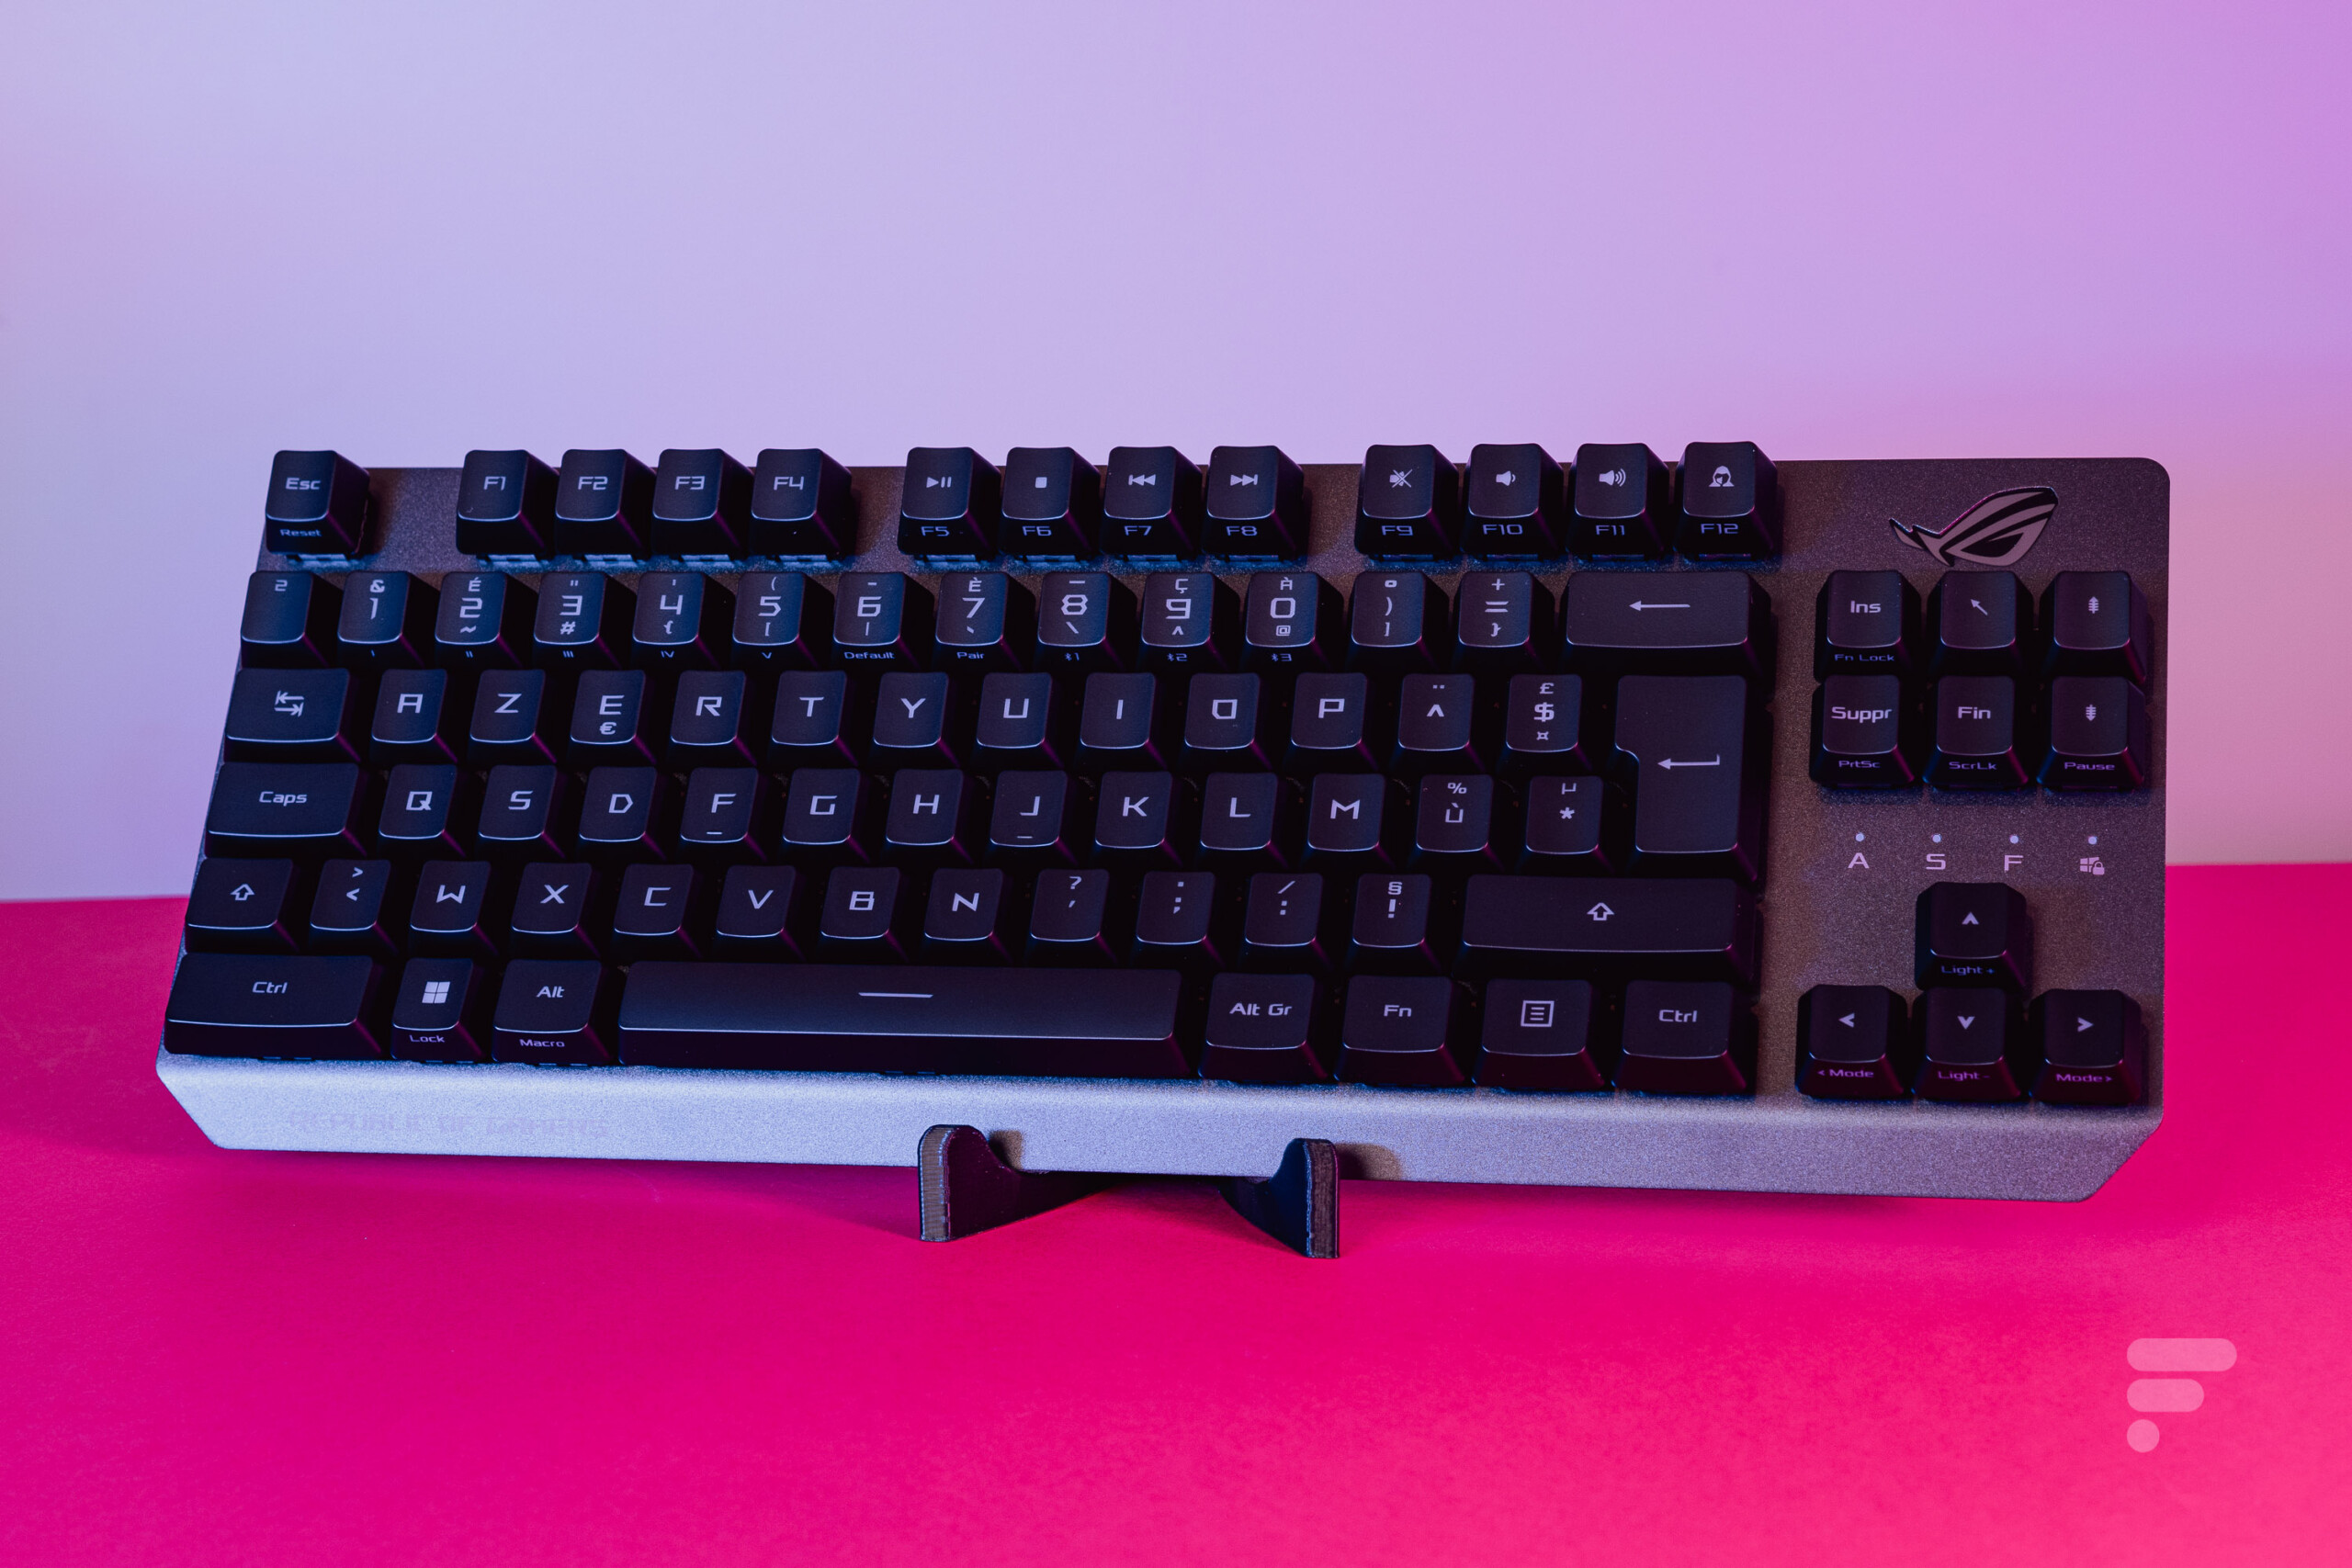 https://images.frandroid.com/wp-content/uploads/2022/05/asus-rog-strix-scope-rx-tkl-wireless-deluxe-11-scaled.jpg